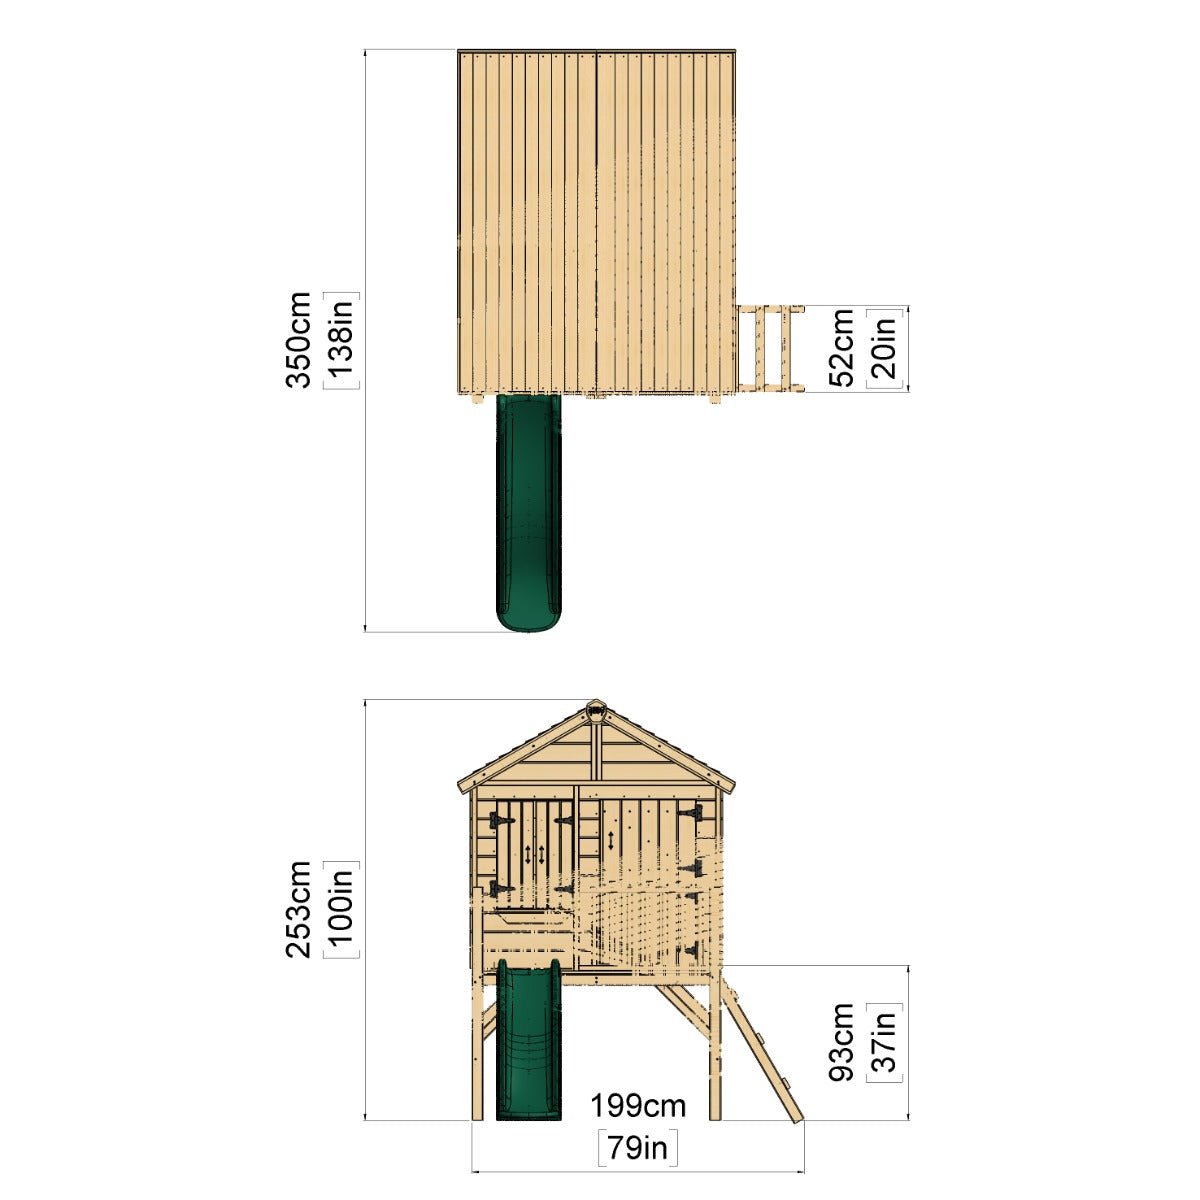 Rebo 5FT x 5FT Childrens Wooden Garden Playhouse on Deck with 6ft Slide - Falcon Green